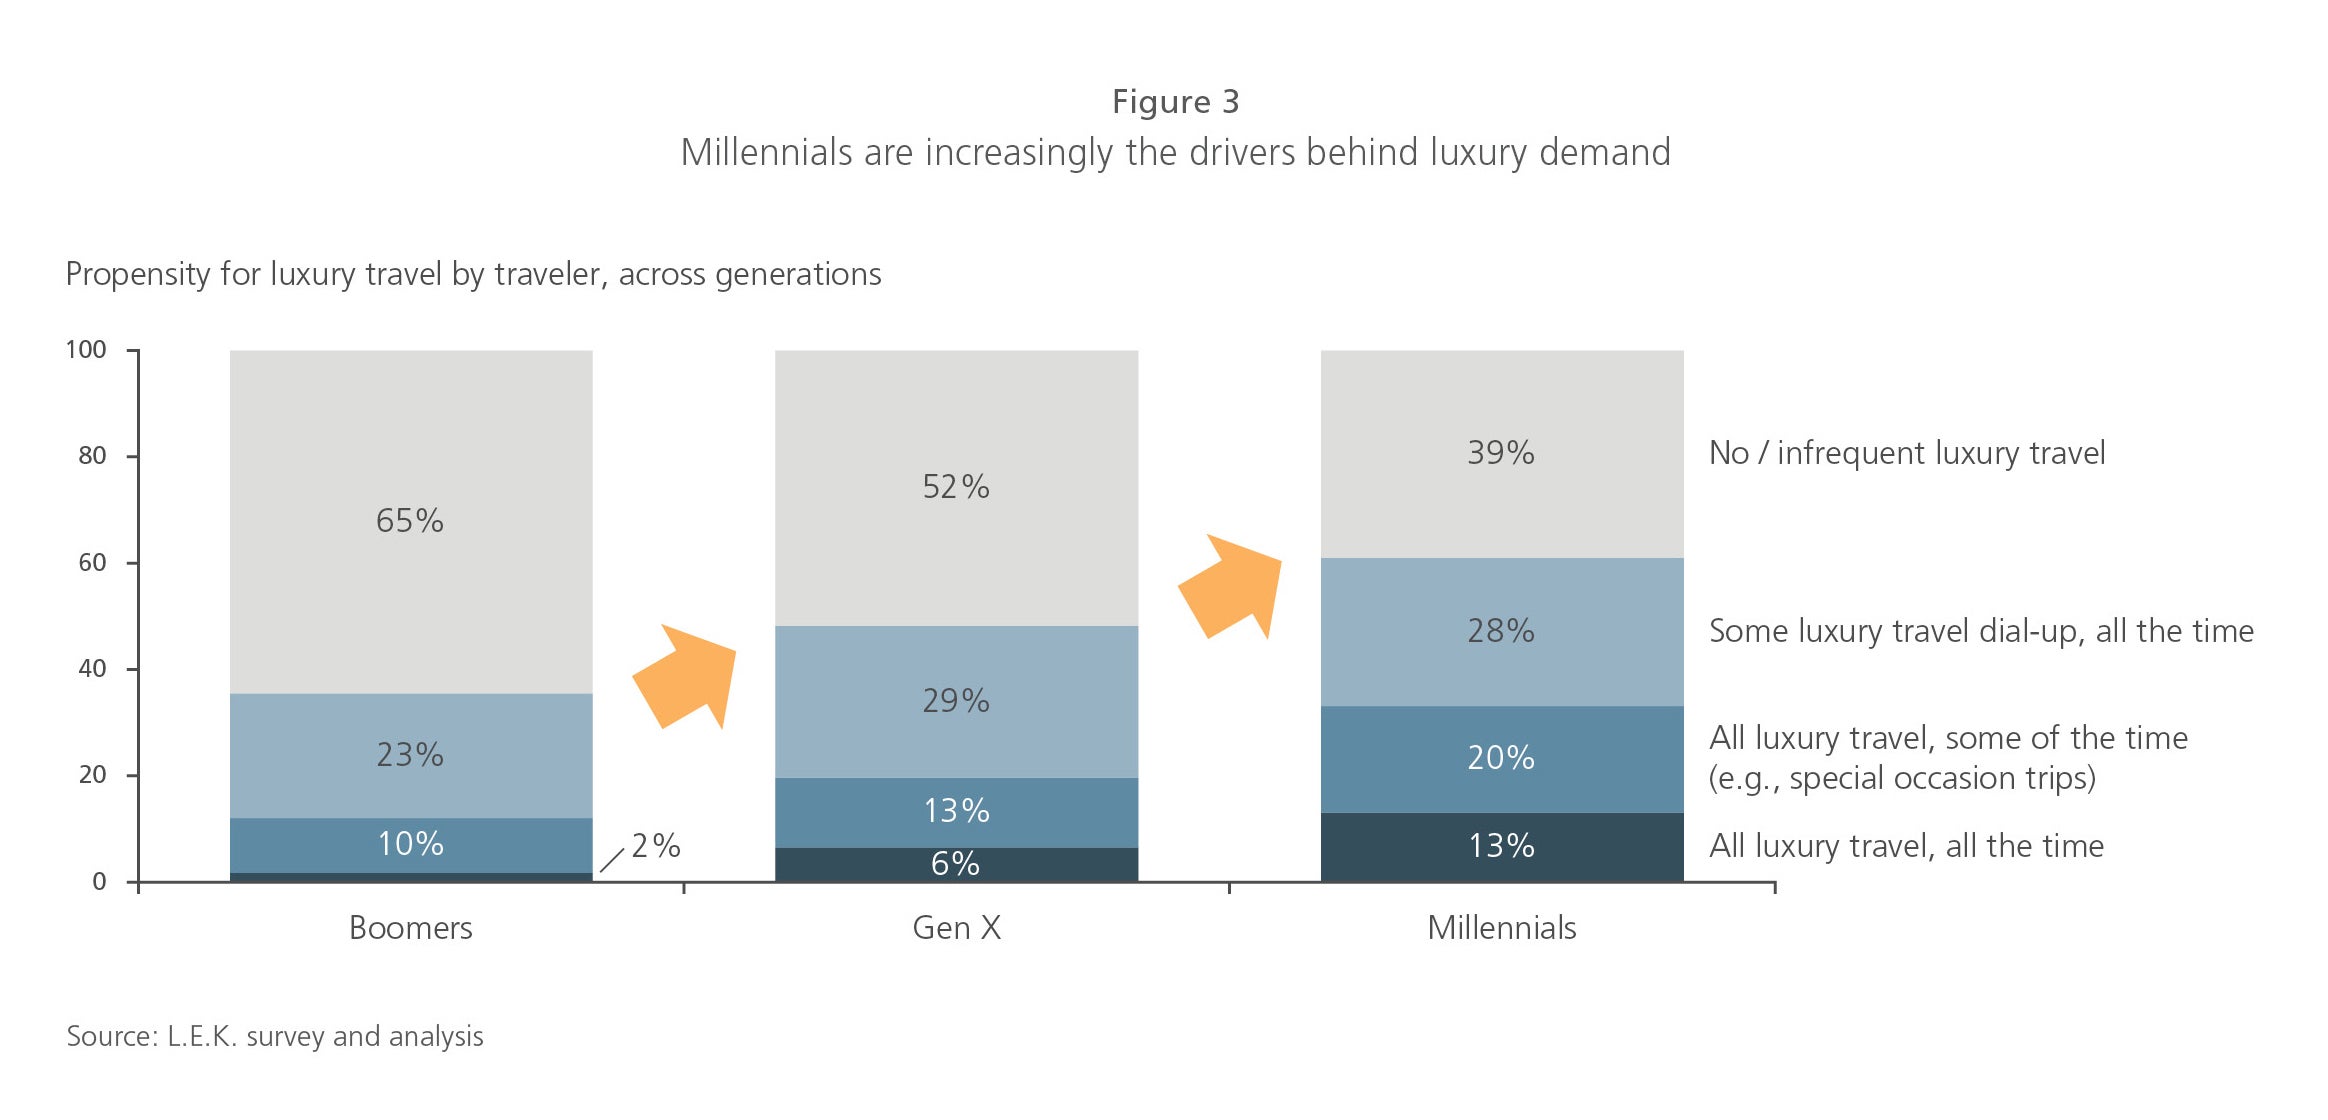 Millennials are increasingly the drivers behind luxury demand